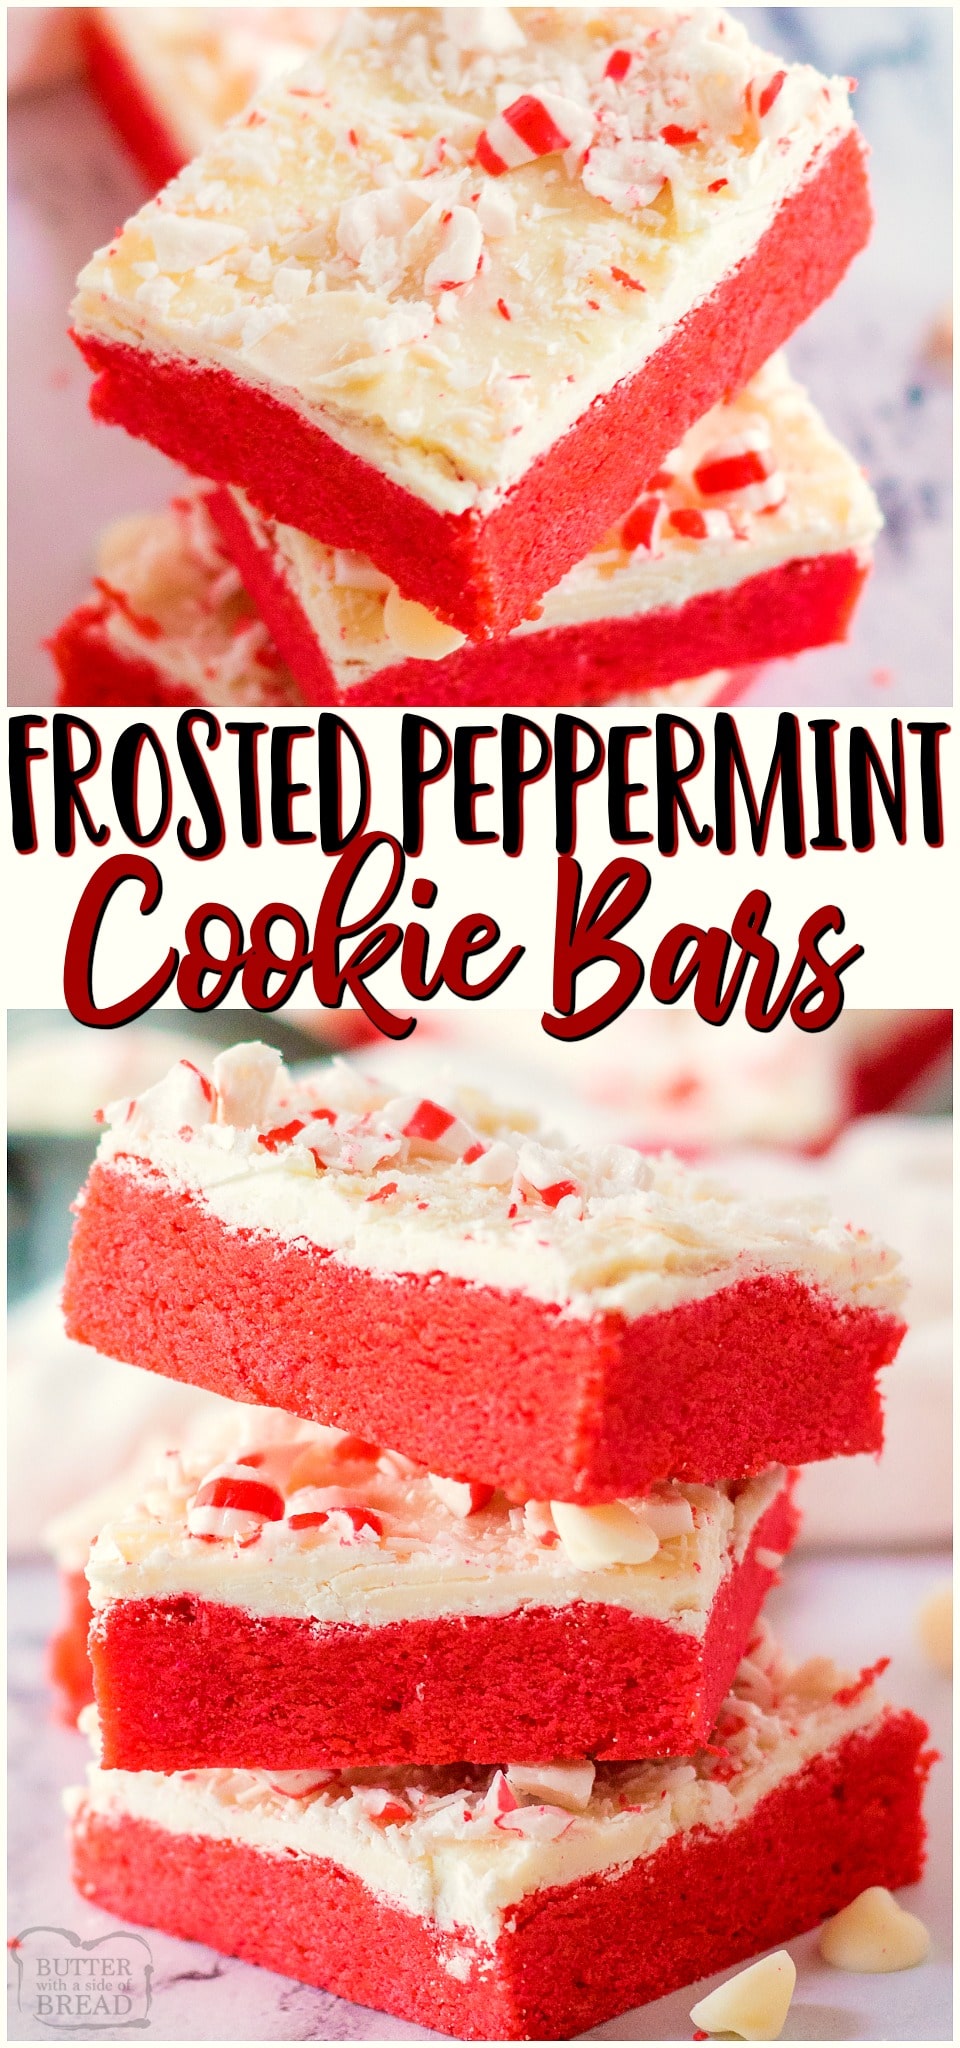 Frosted Peppermint Cookie Bars are festive holiday sugar cookies baked into bars & topped with sweet white chocolate & peppermints! Easy cookie bar recipe with lovely peppermint flavor perfect for Christmas baking. #cookies #bars #peppermint #whitechocolate #baking #holidays #easyrecipe from FAMILY COOKIE RECIPES via @buttergirls